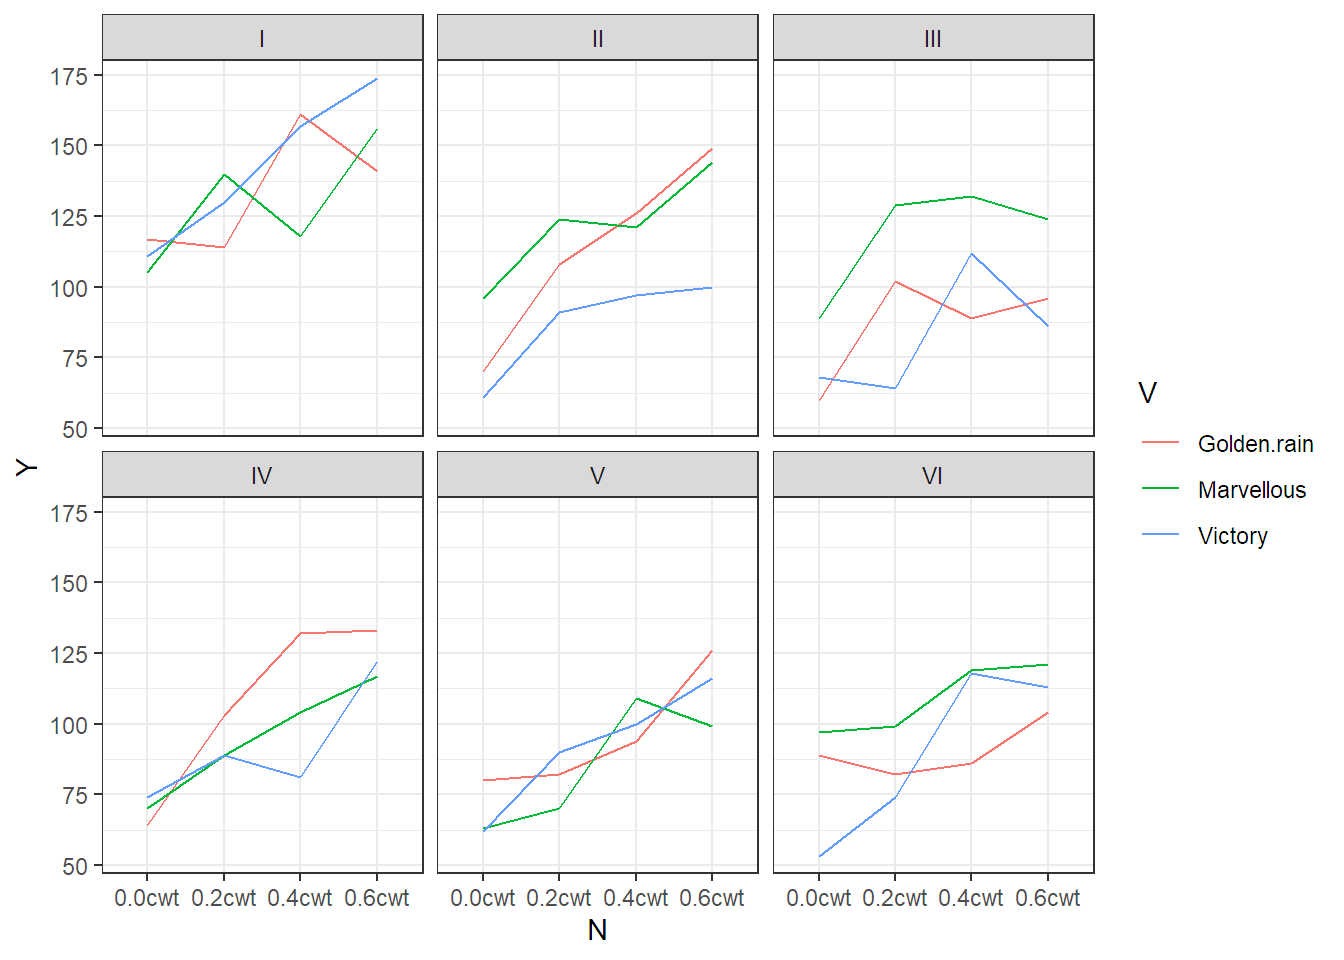 Interaction plots for each block of the oats data set. Blocks are labelled with Roman numerals.